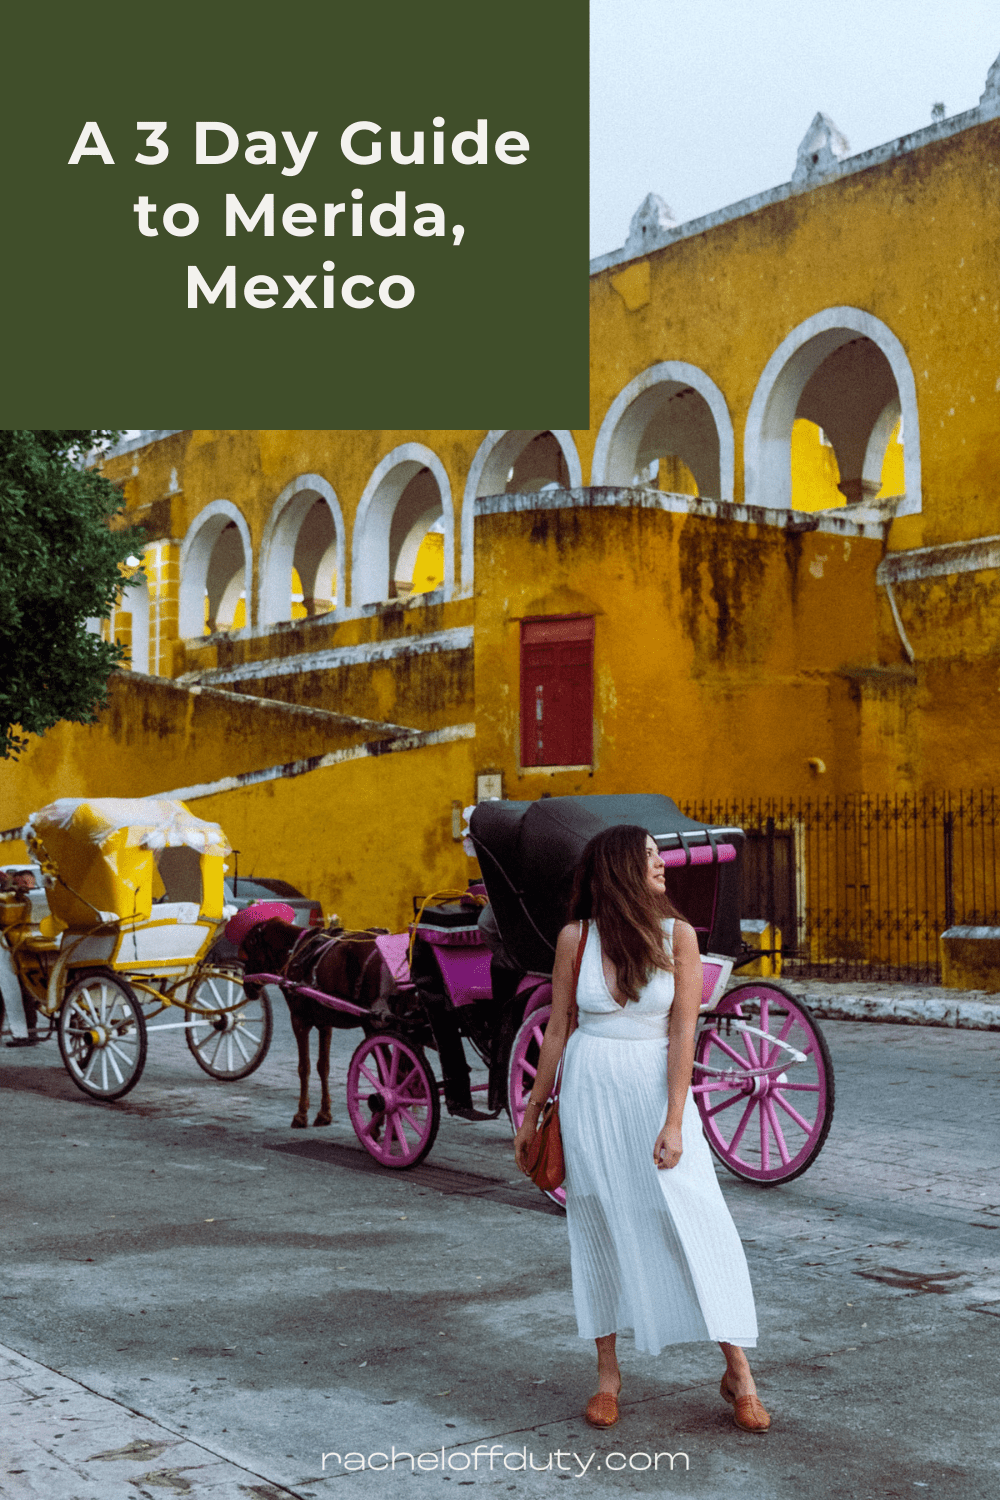 Rachel Off Duty: A 3 Day Guide to Merida, Mexico